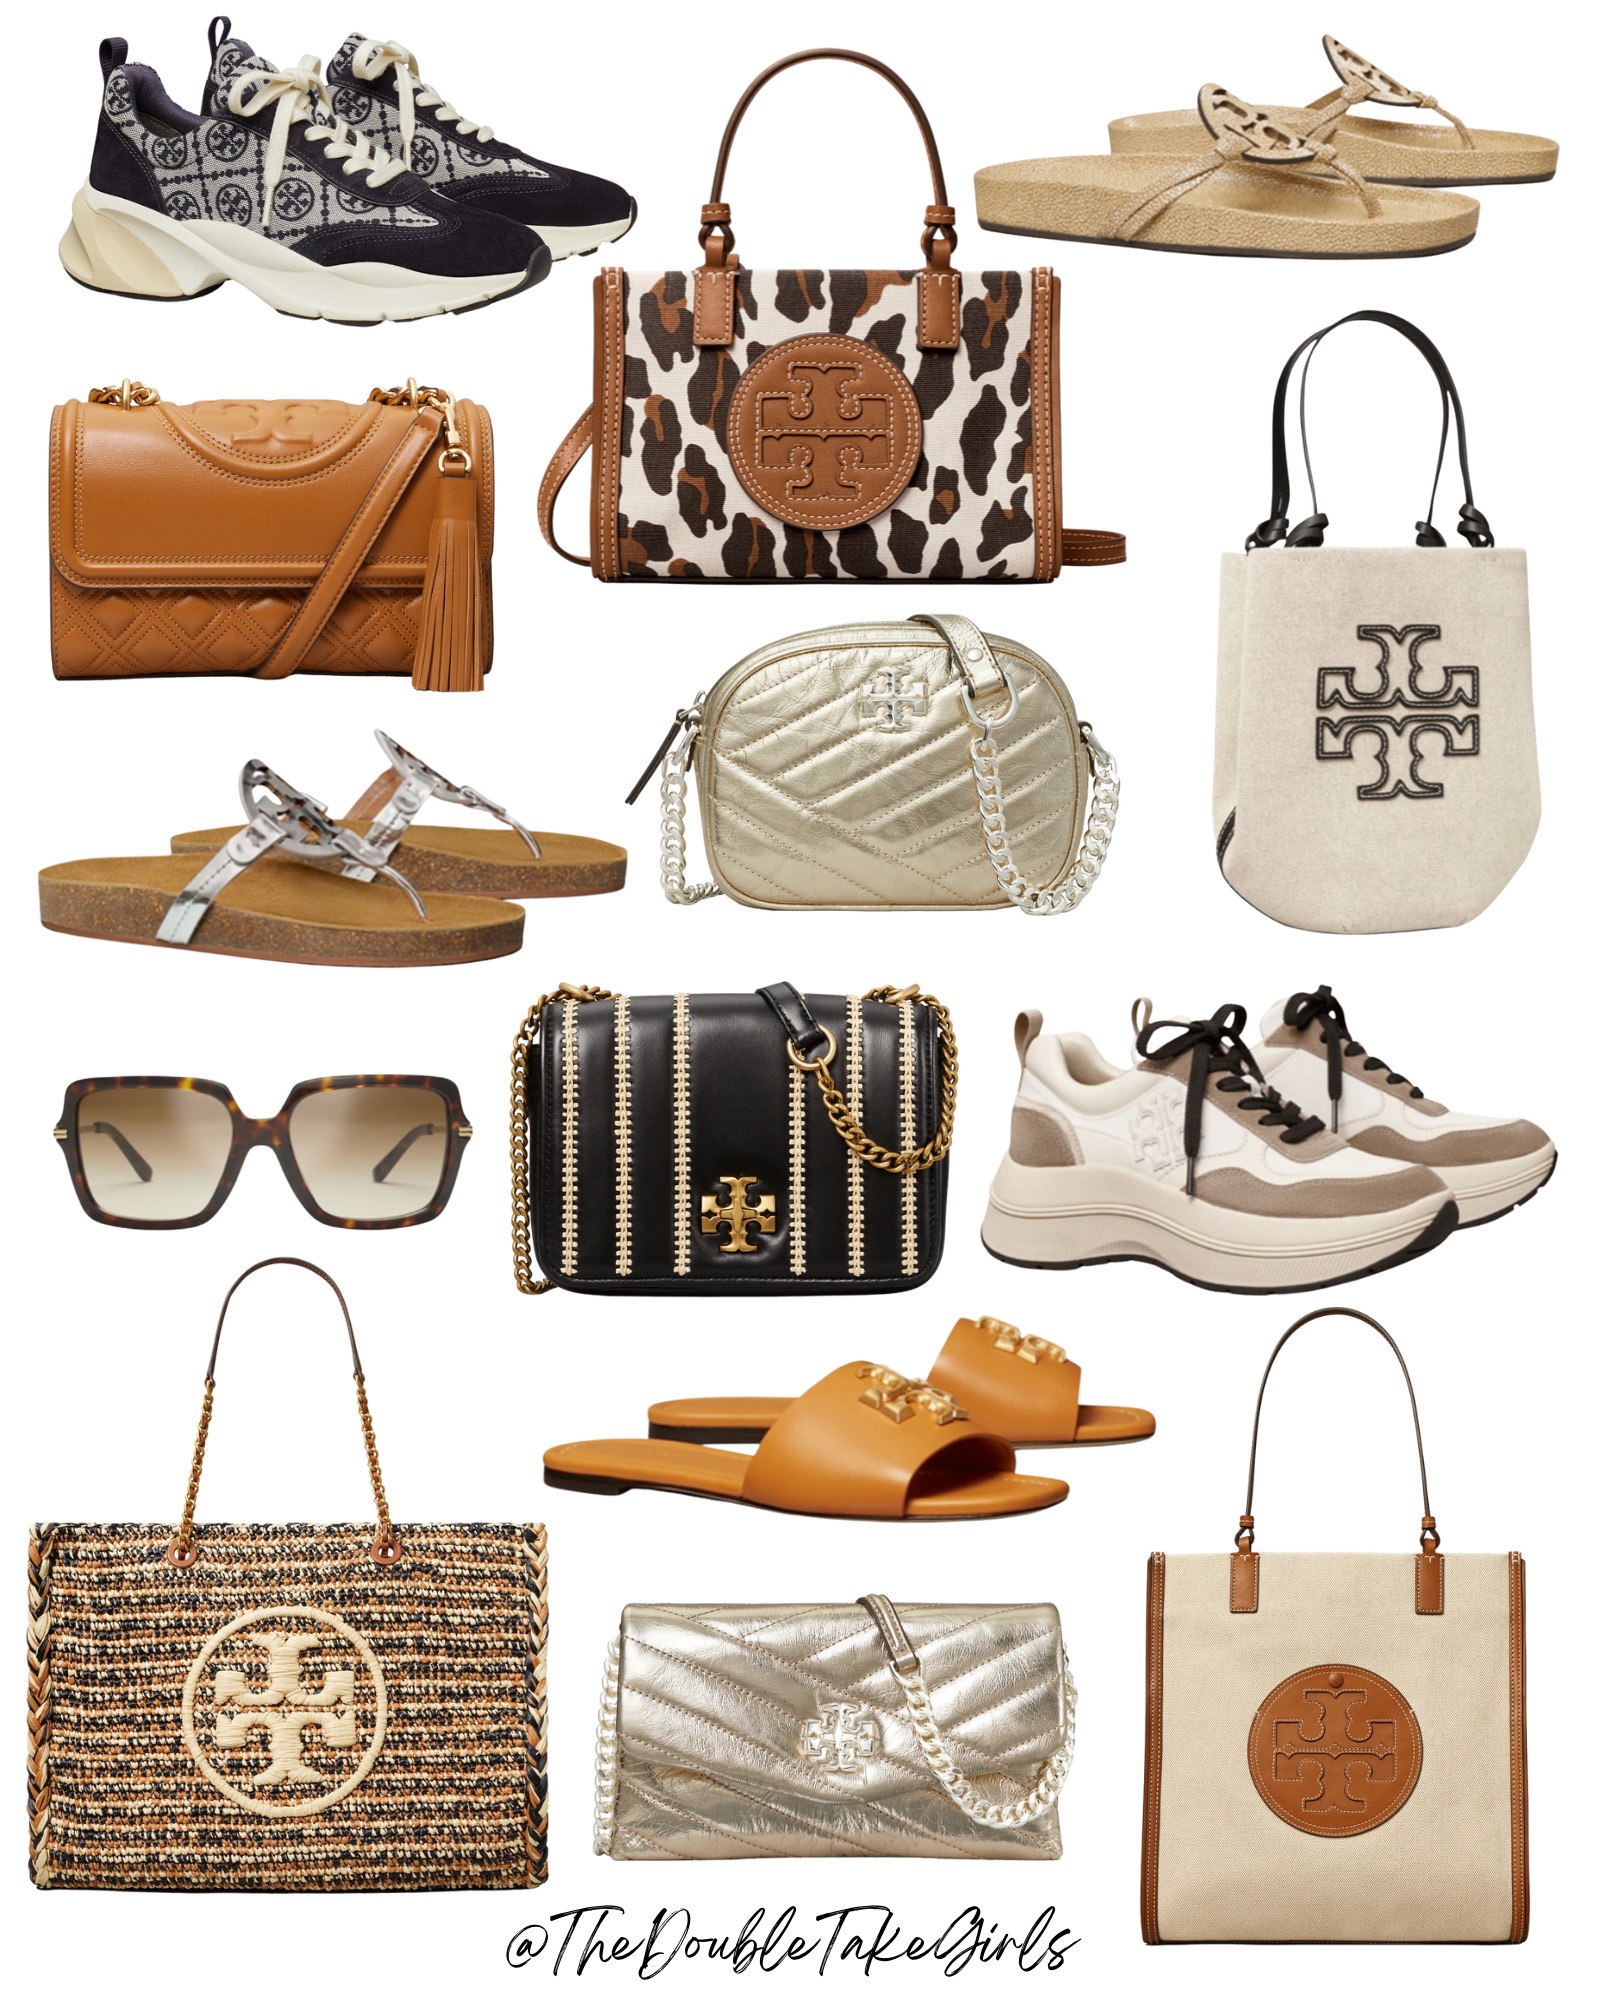 Tory Burch Private Sale 2022 Is Live! Up To 70% Off + FREE Shipping - The  Double Take Girls